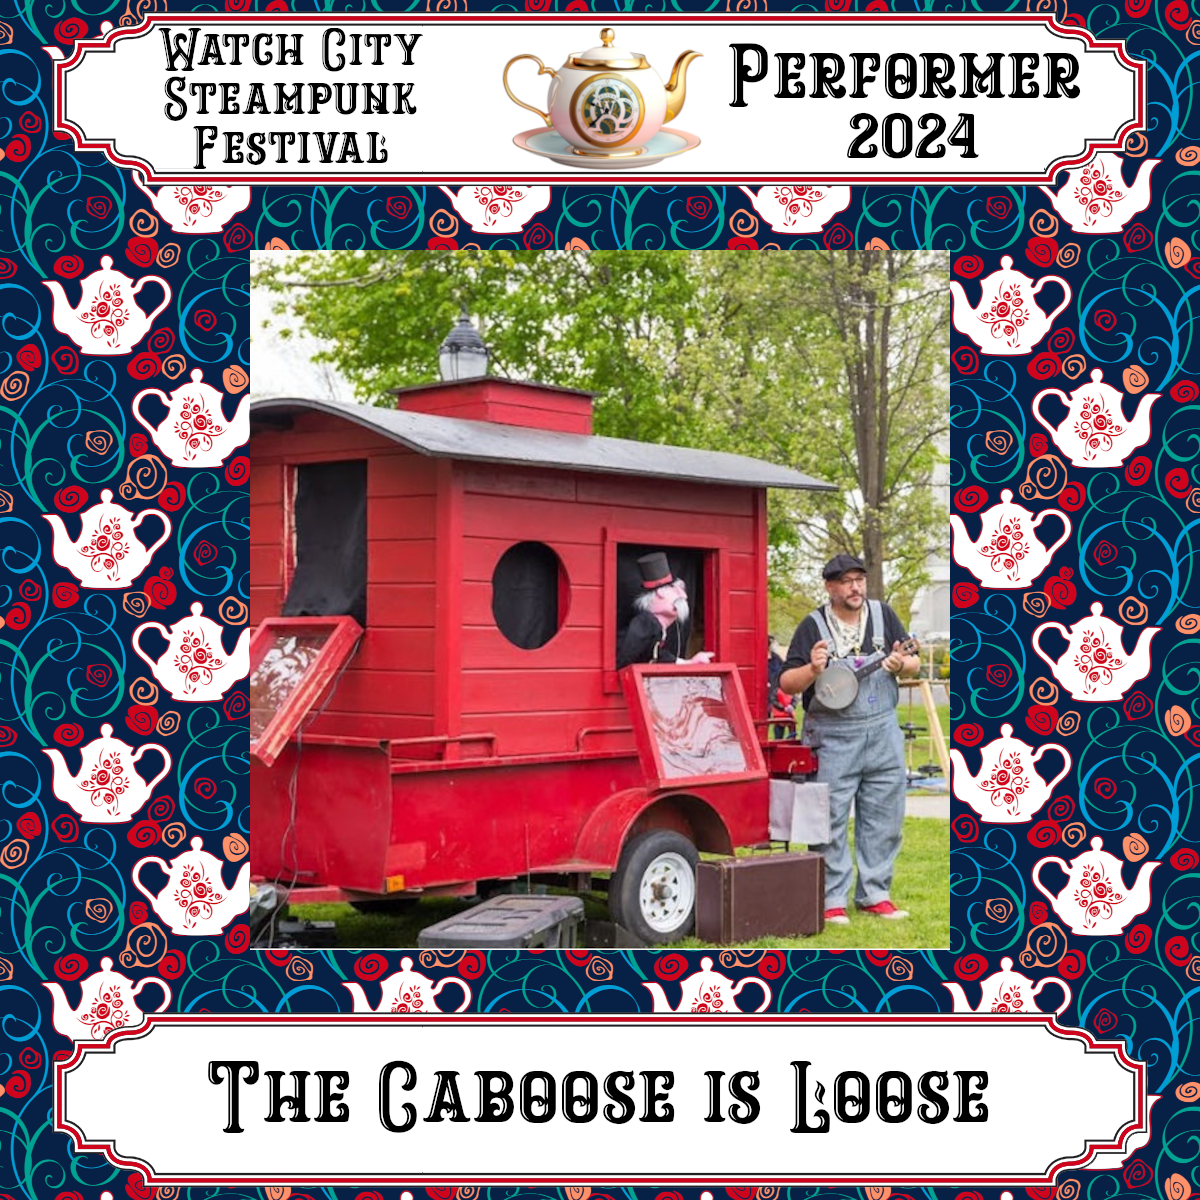 The Caboose is Loose